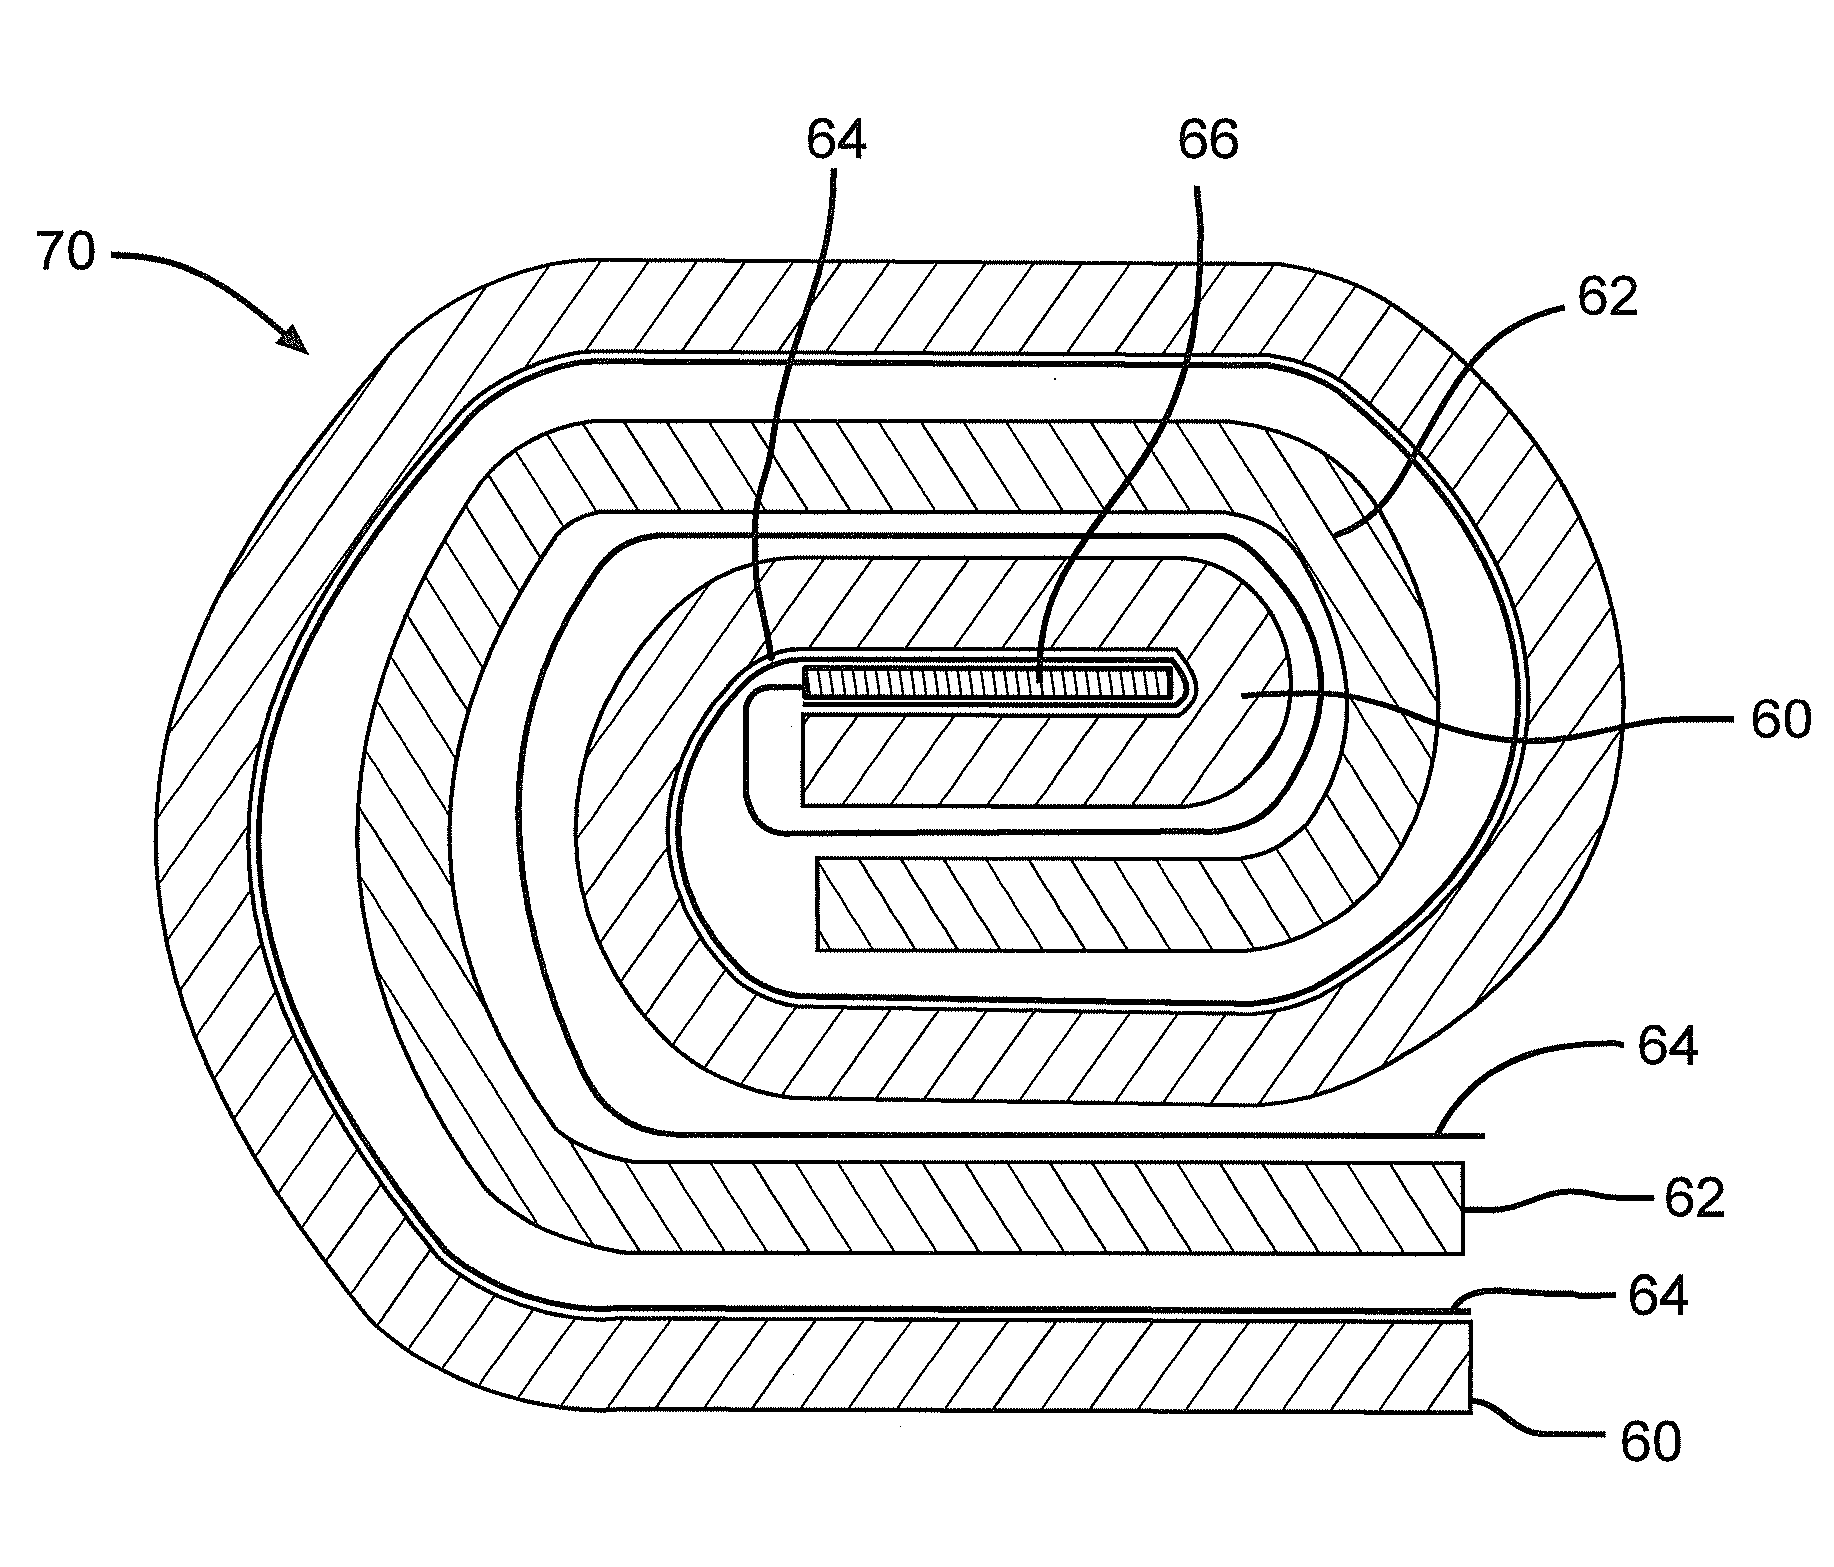 Method of making electrodes with distributed material loading used in electrochemical cells